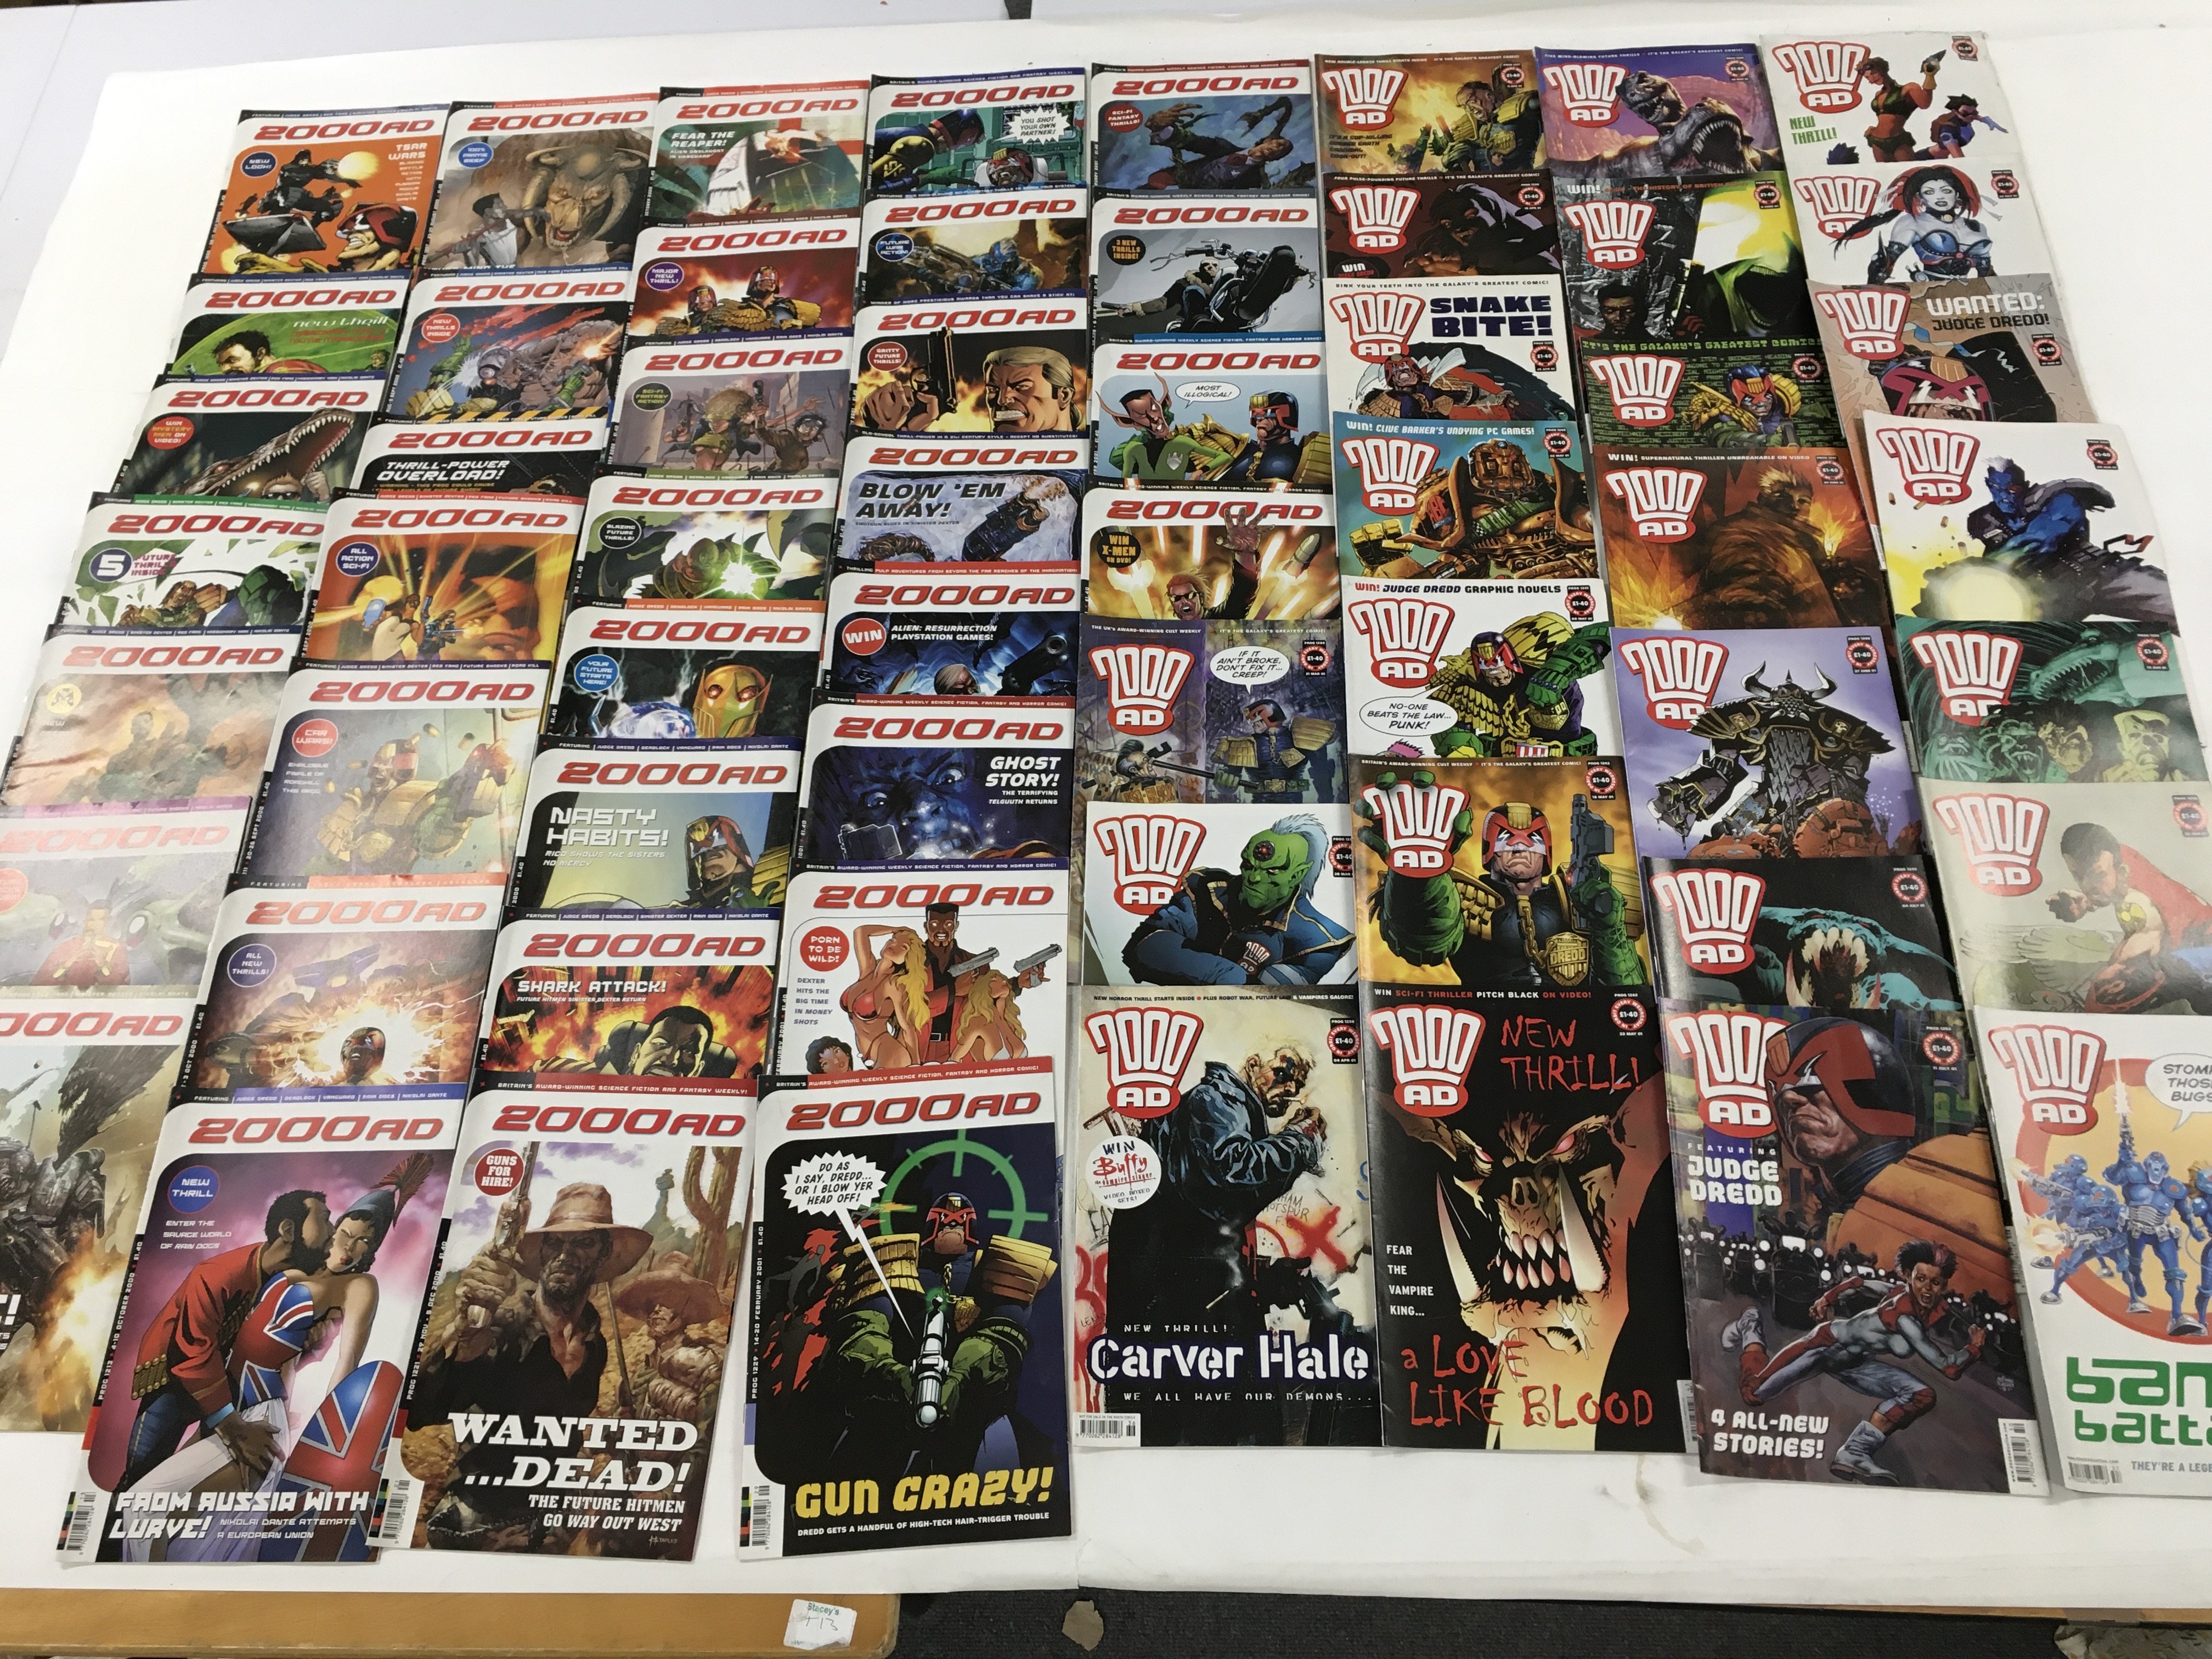 A collection of 2000 AD comics including special Christmas edition together with a collection of